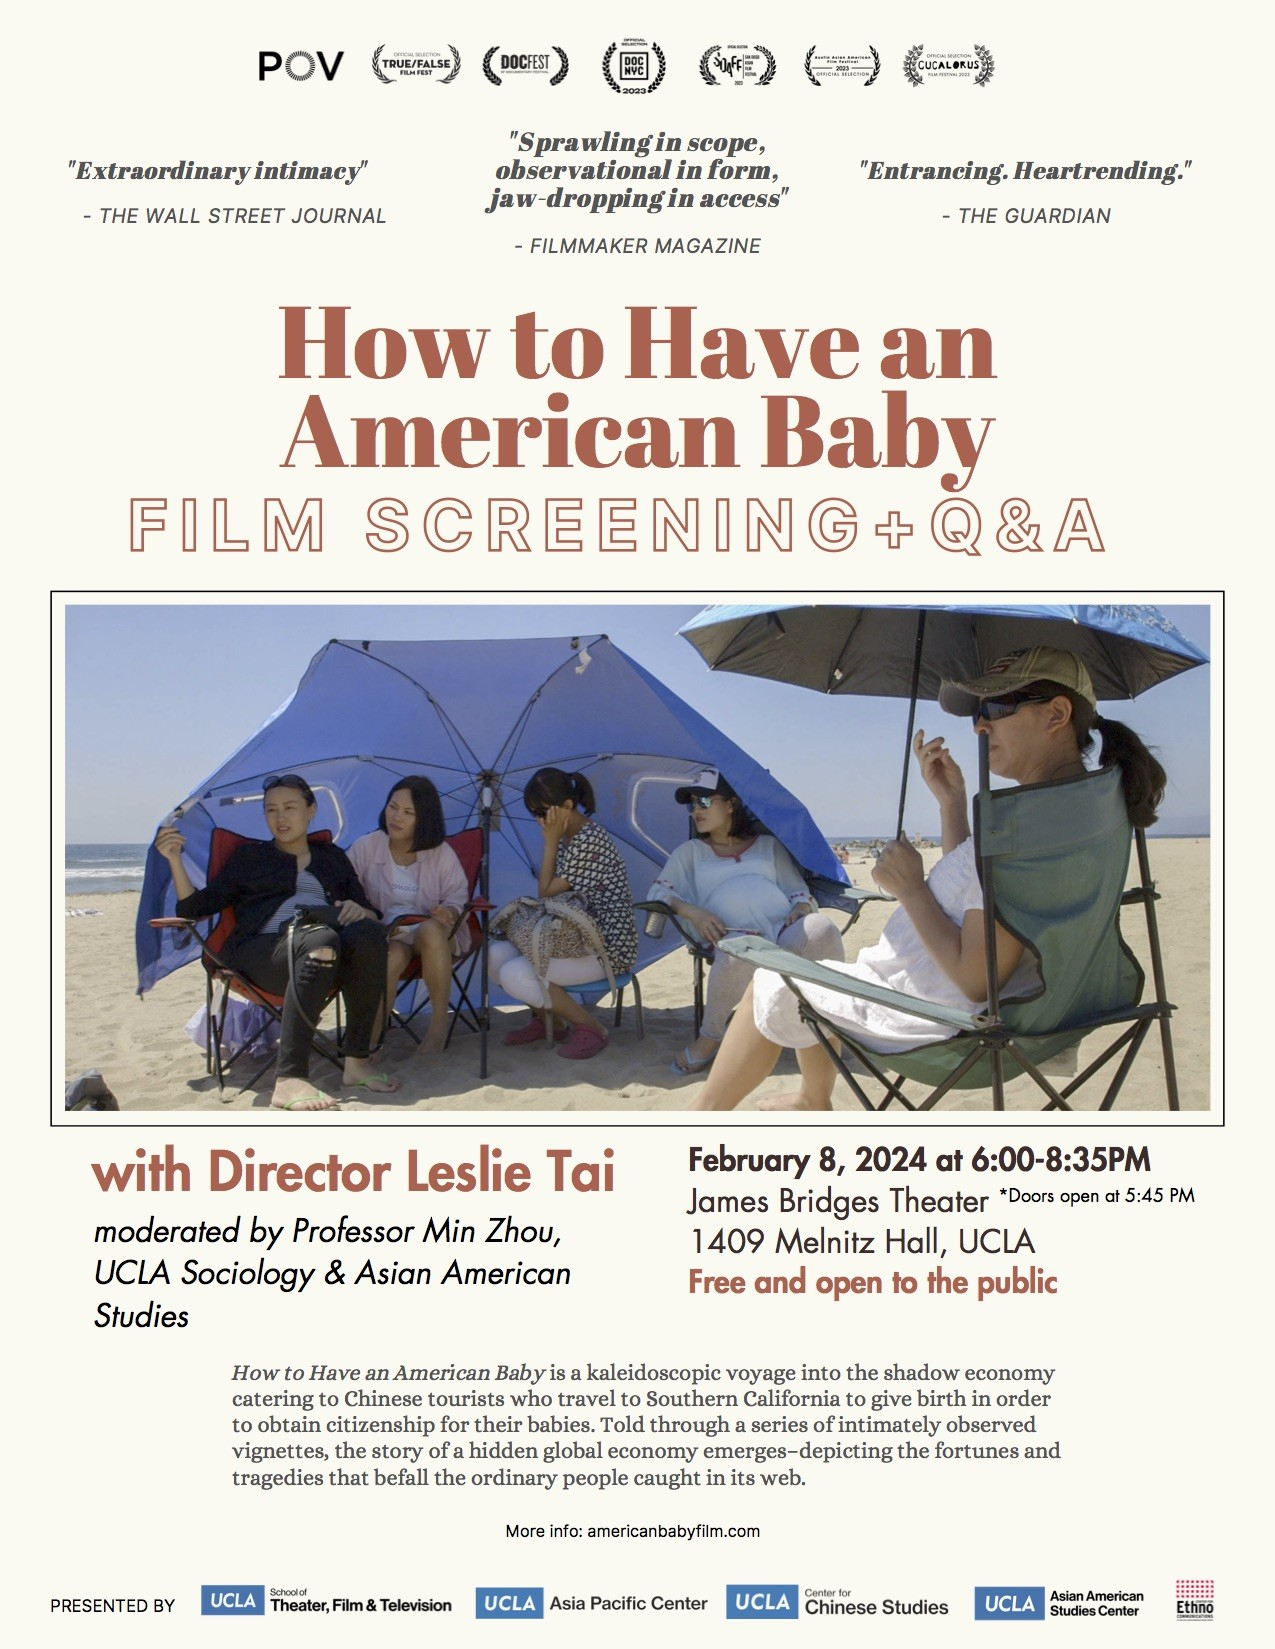 How to Have An American Baby film poster with photo of women sitting under an umbrella on the beach